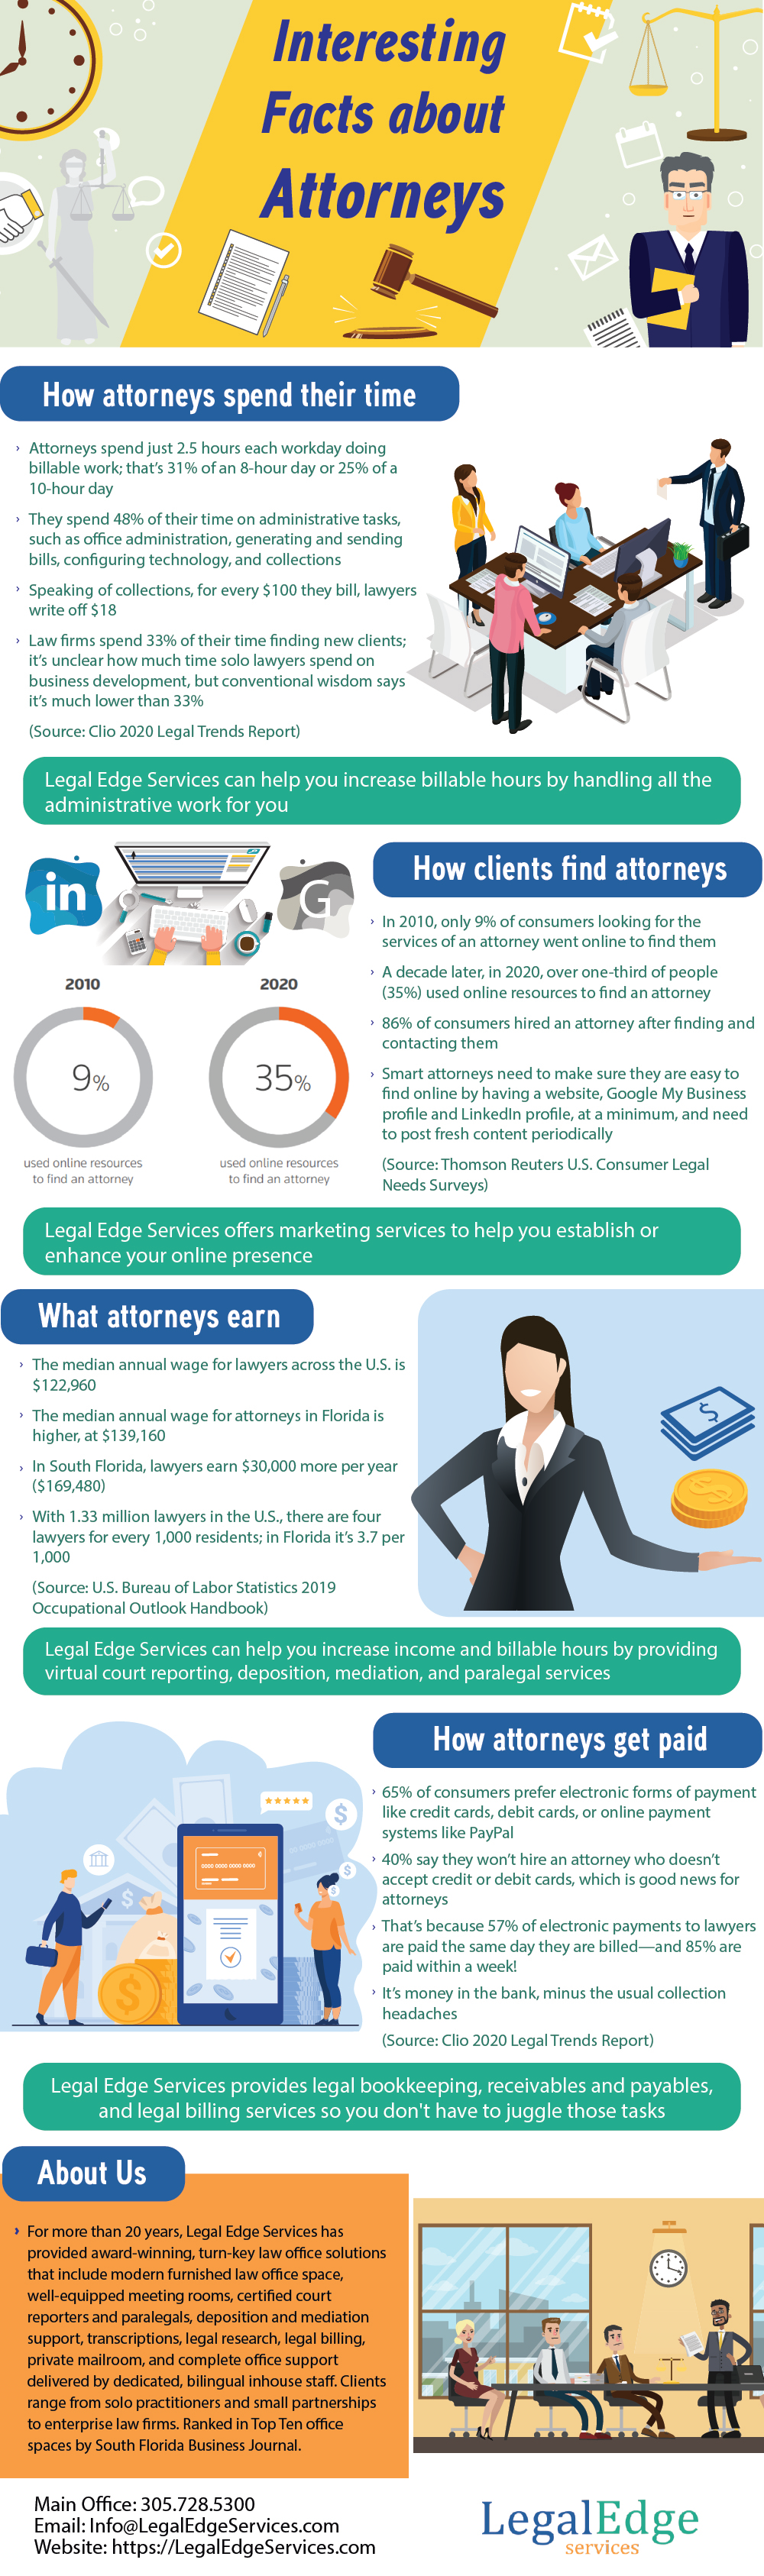 Infographic by Legal Edge Services